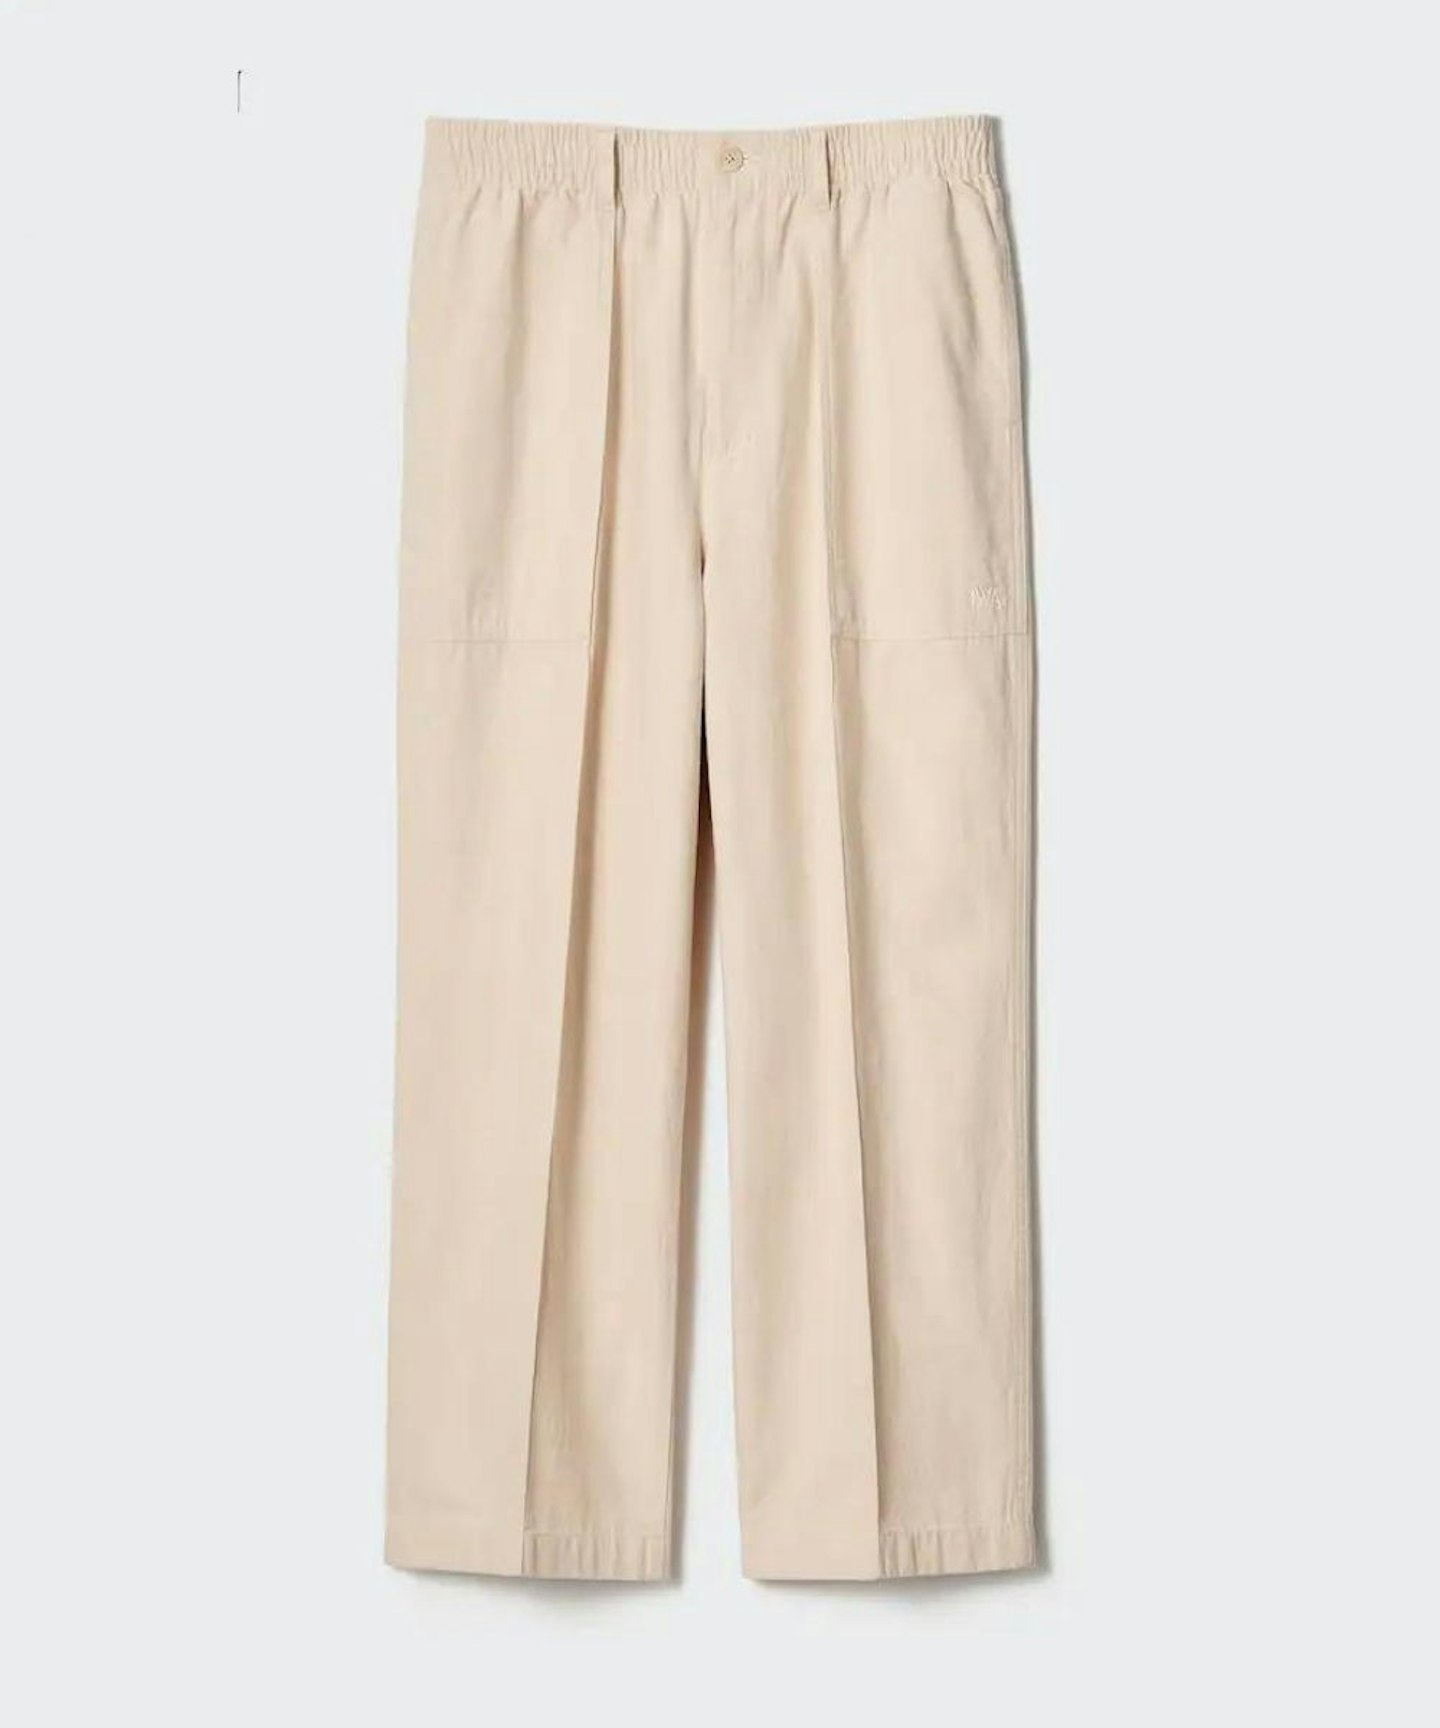 Uniqlo x JW Anderson Linen Blend Relaxed Fit Trousers